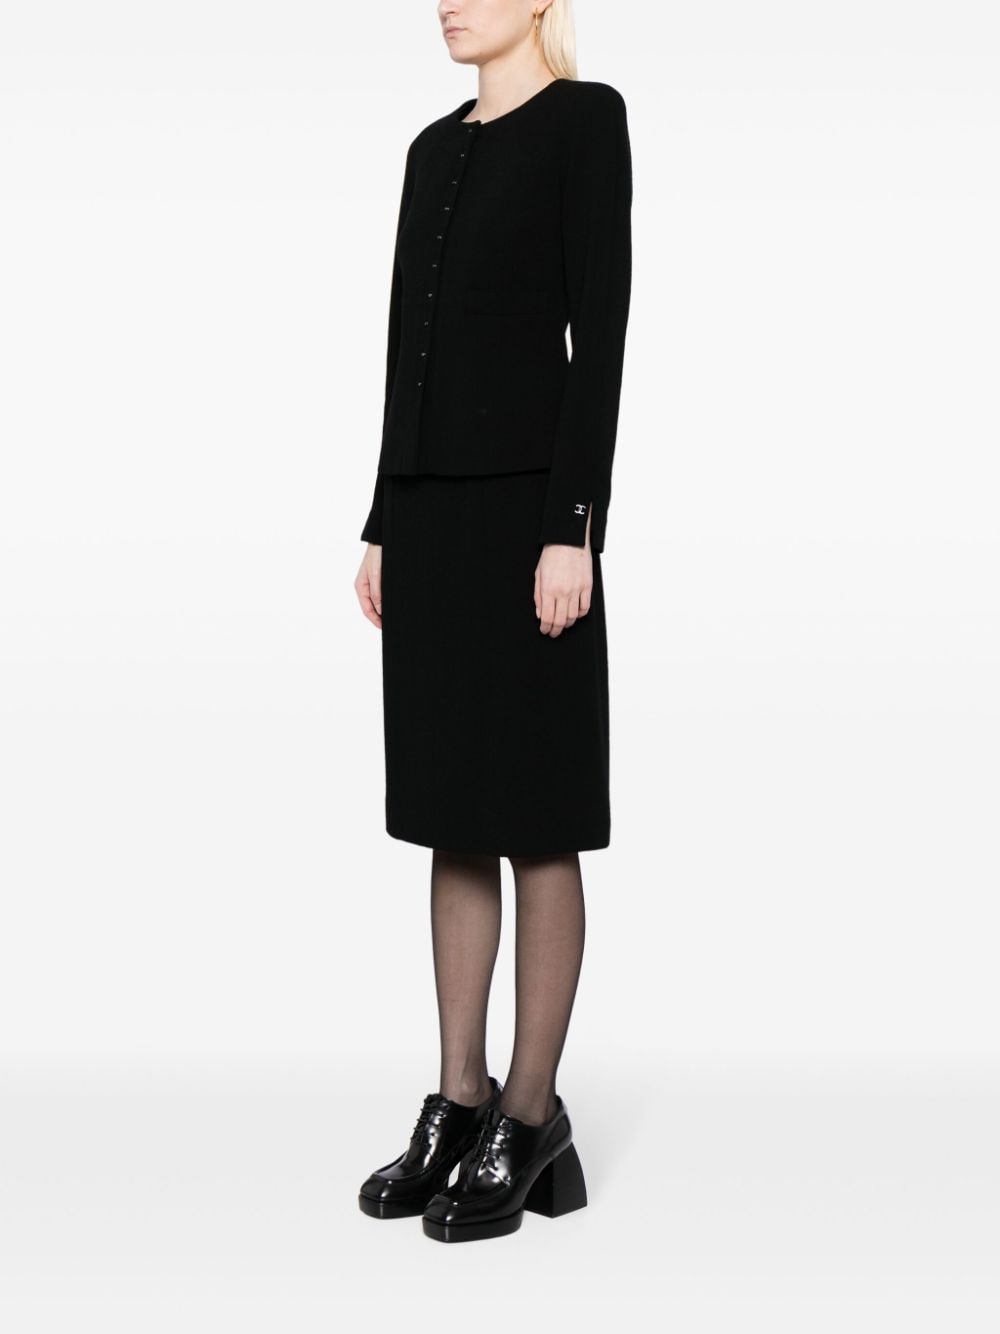 Pre-owned Chanel 2002 Single-breasted Wool Skirt Suit In Black